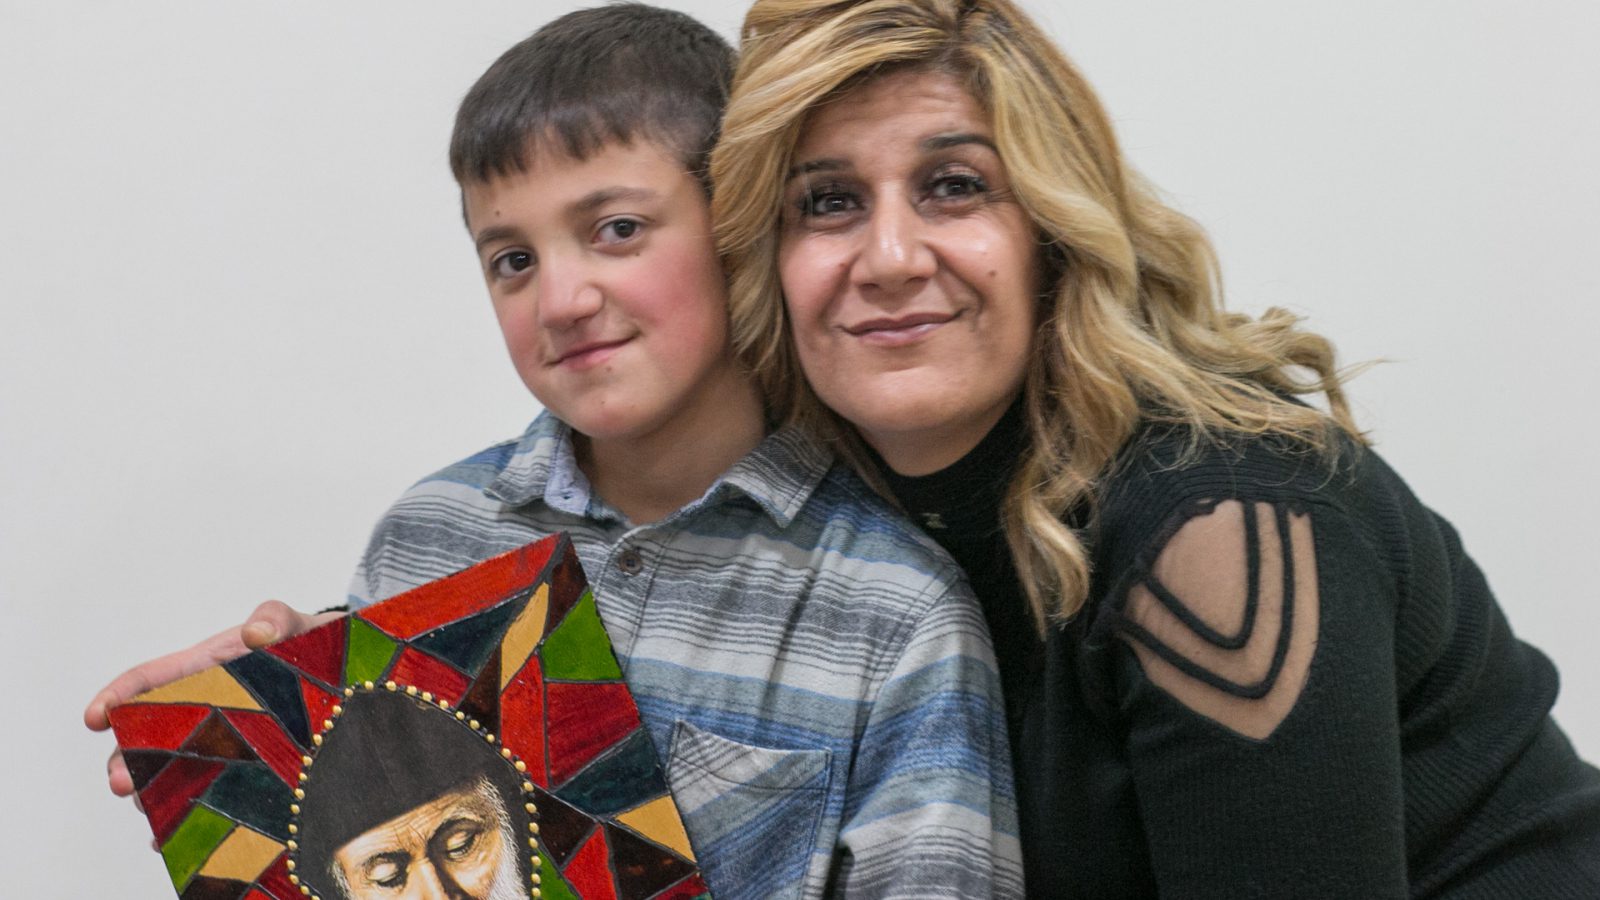 Faten Merhi and his son Loubnan pose with a painting by Mar Charbel that Faten made during the pottery and decoration workshop given by the NGO La Voix de la Femme and funded by the EU as part of the DAWRIC project. Chiyah, Lebanon